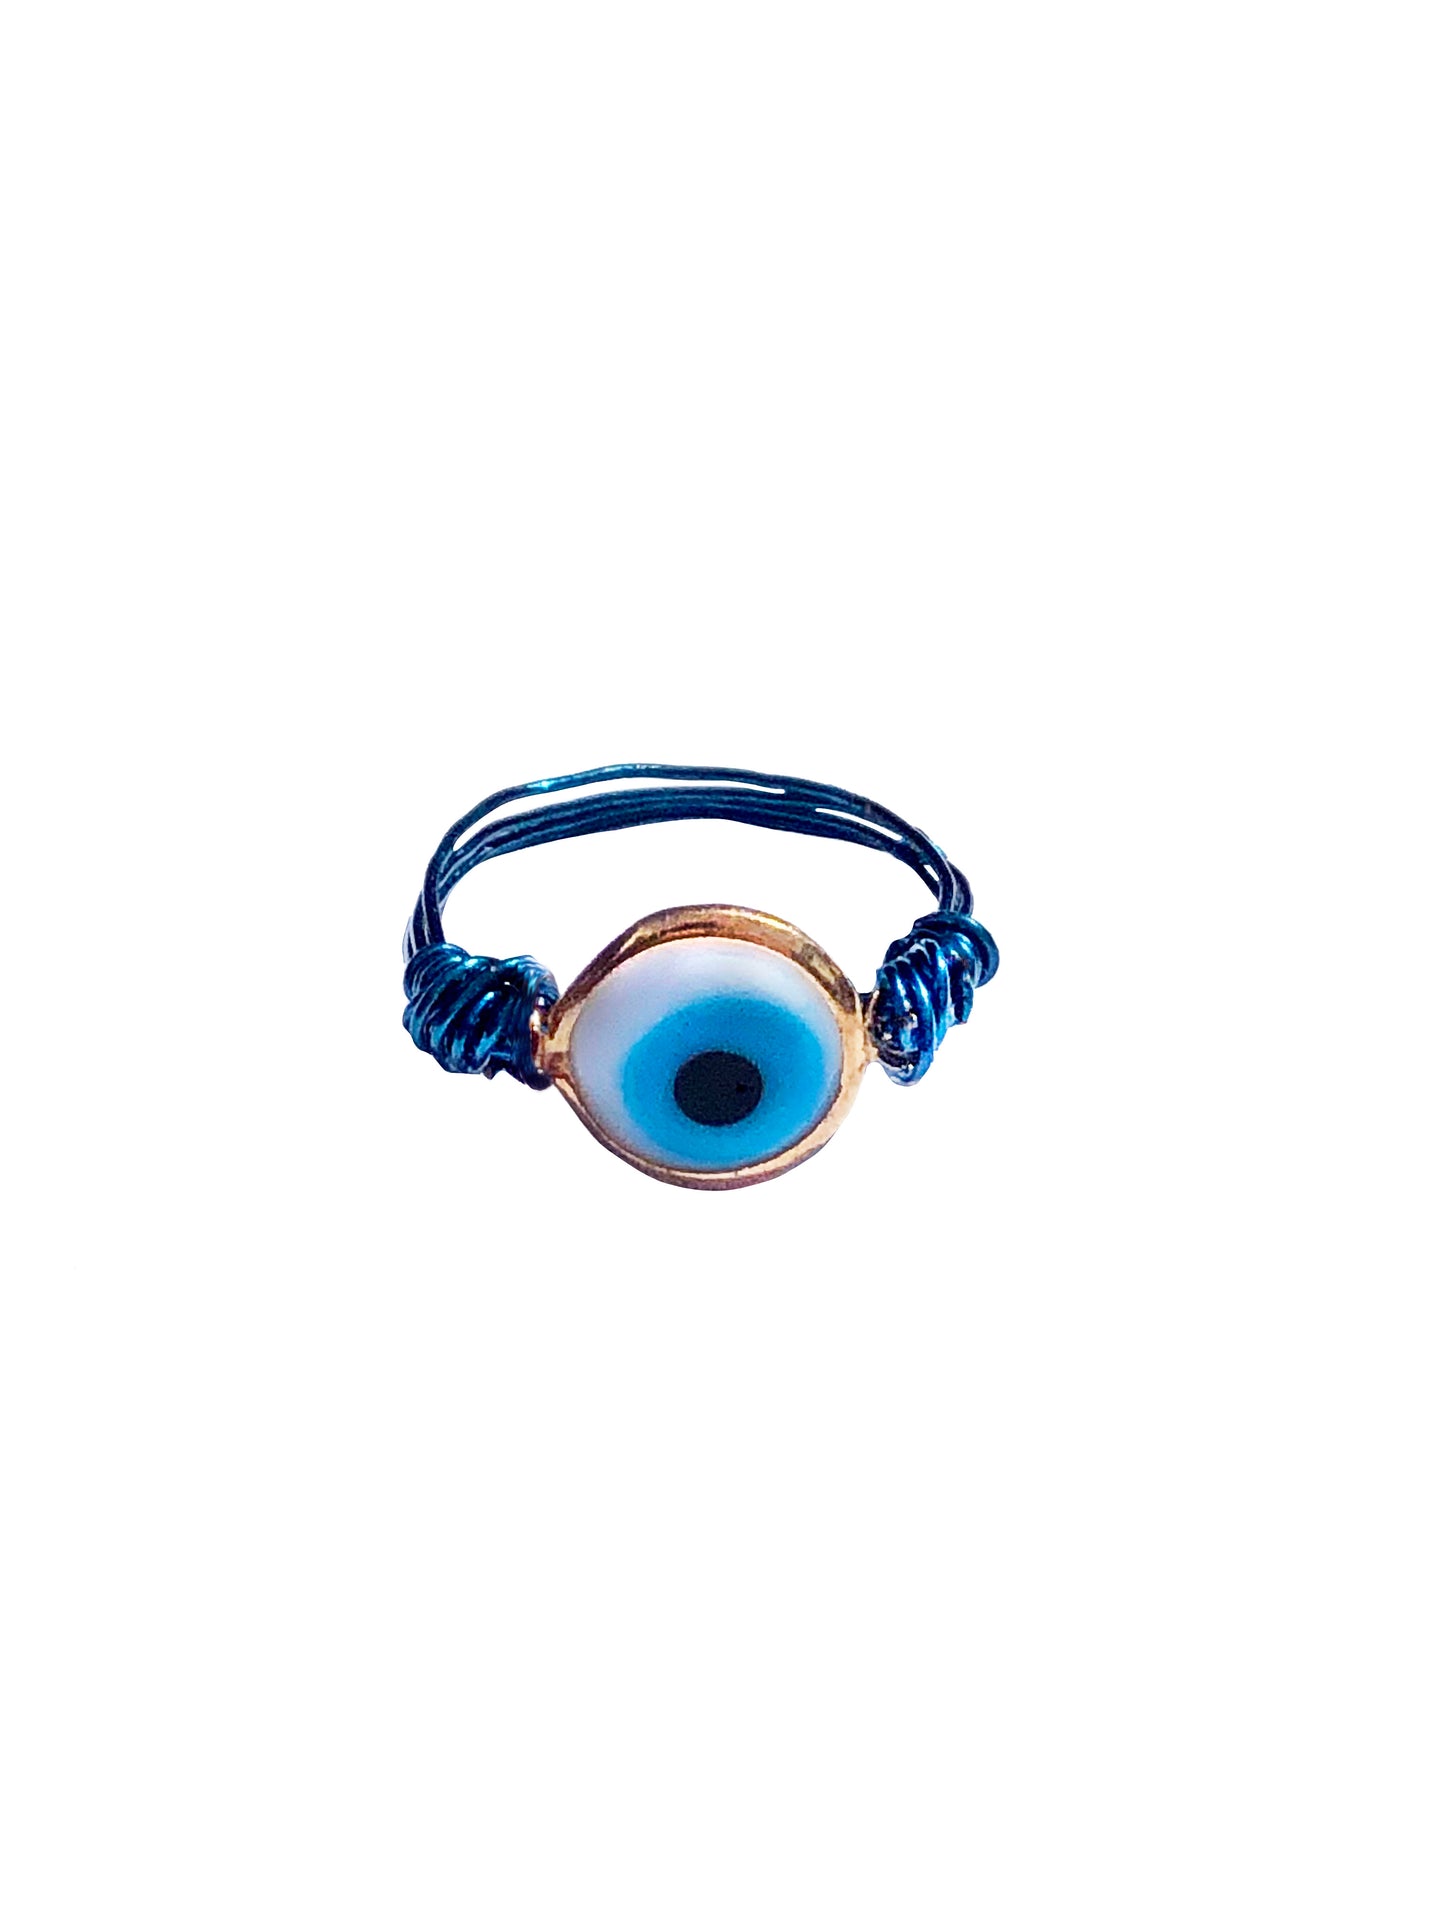 handmade blue wire wrapped gold evil eye charm.